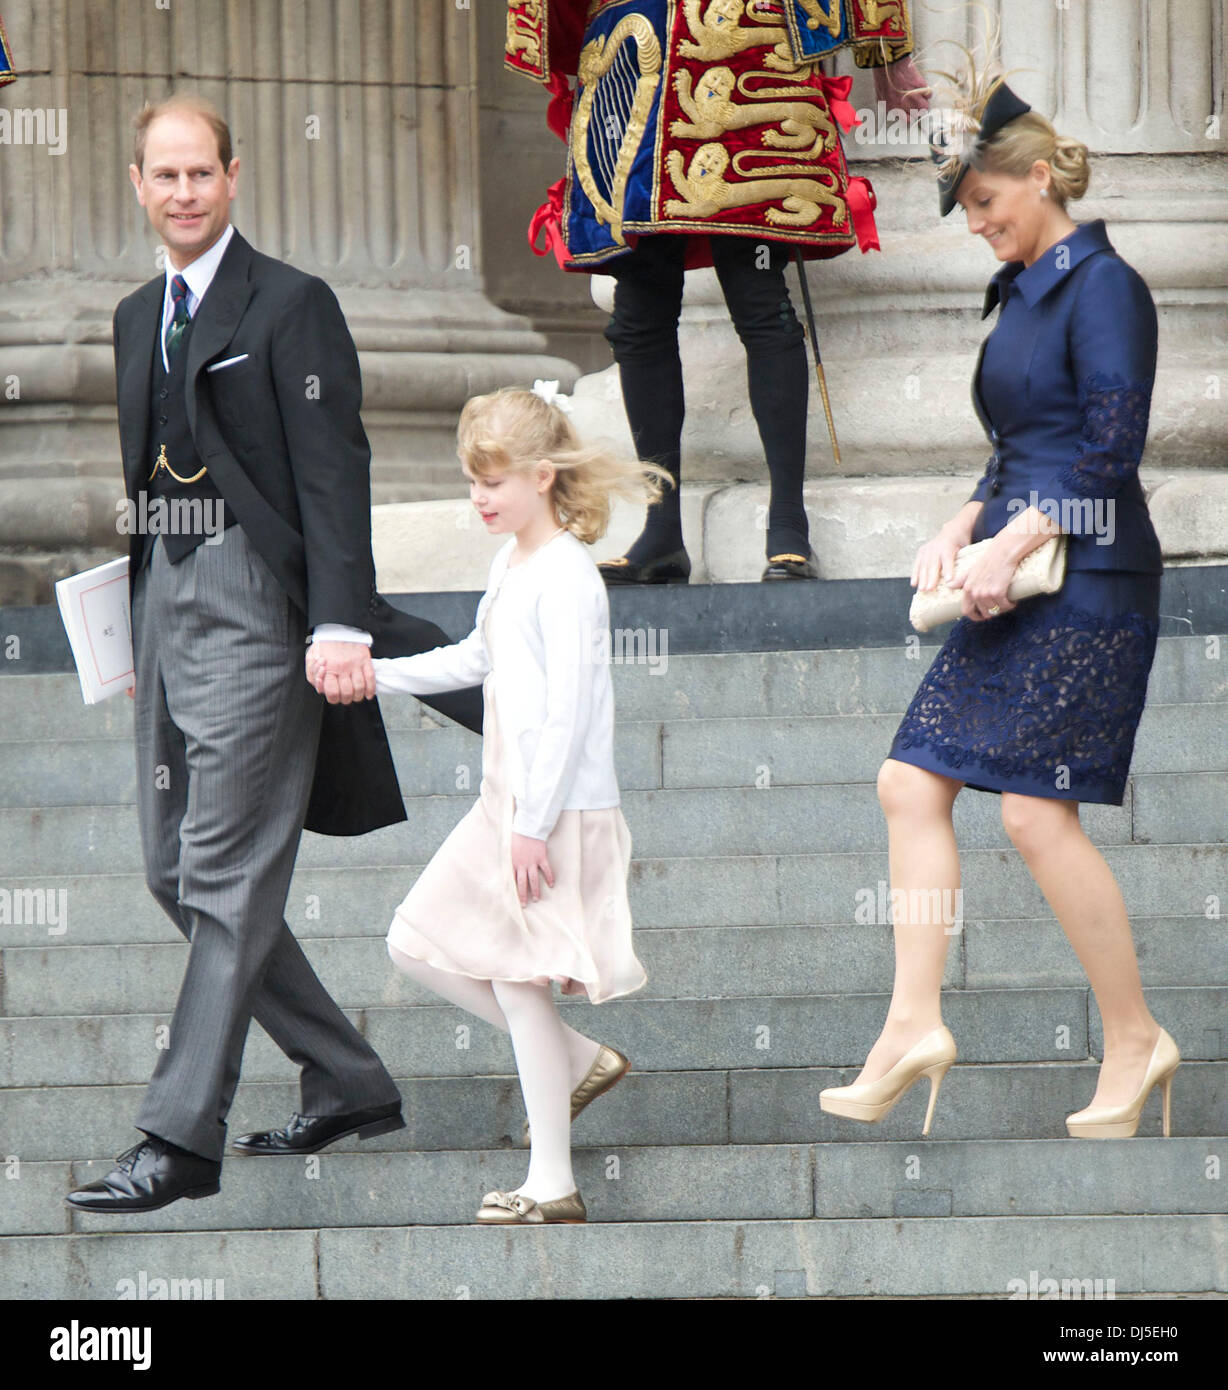 Prince Edward, his wife Sophie, Countess of Wessex and their daughter Lady Louise Windsor leaving the Queen's Diamond Jubilee thanksgiving service at St. Paul's Cathedral London, England - 05.06.12 Stock Photo